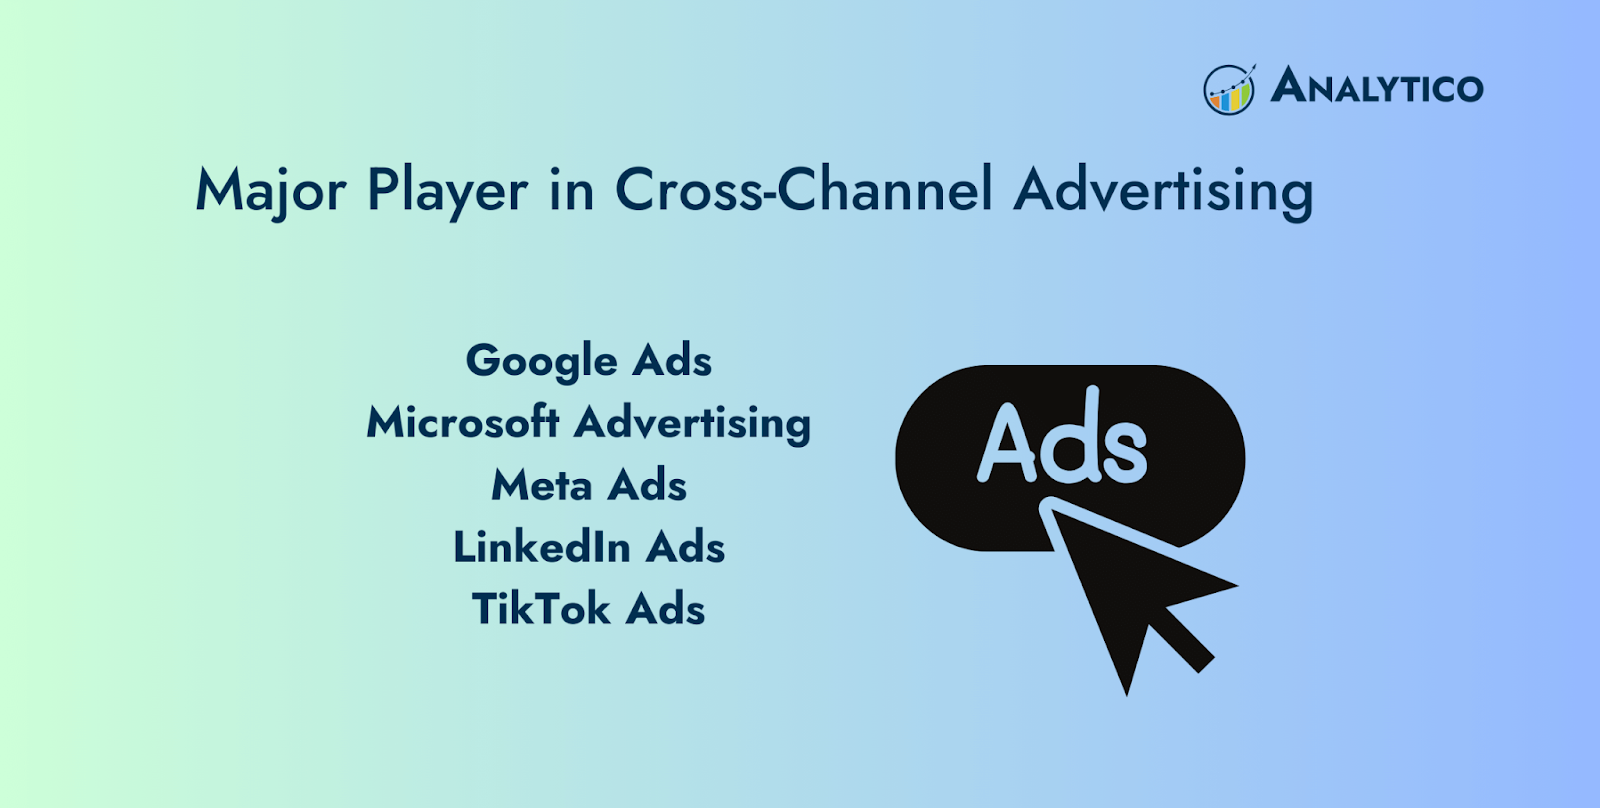 Major Player in Cross-Channel Advertising: